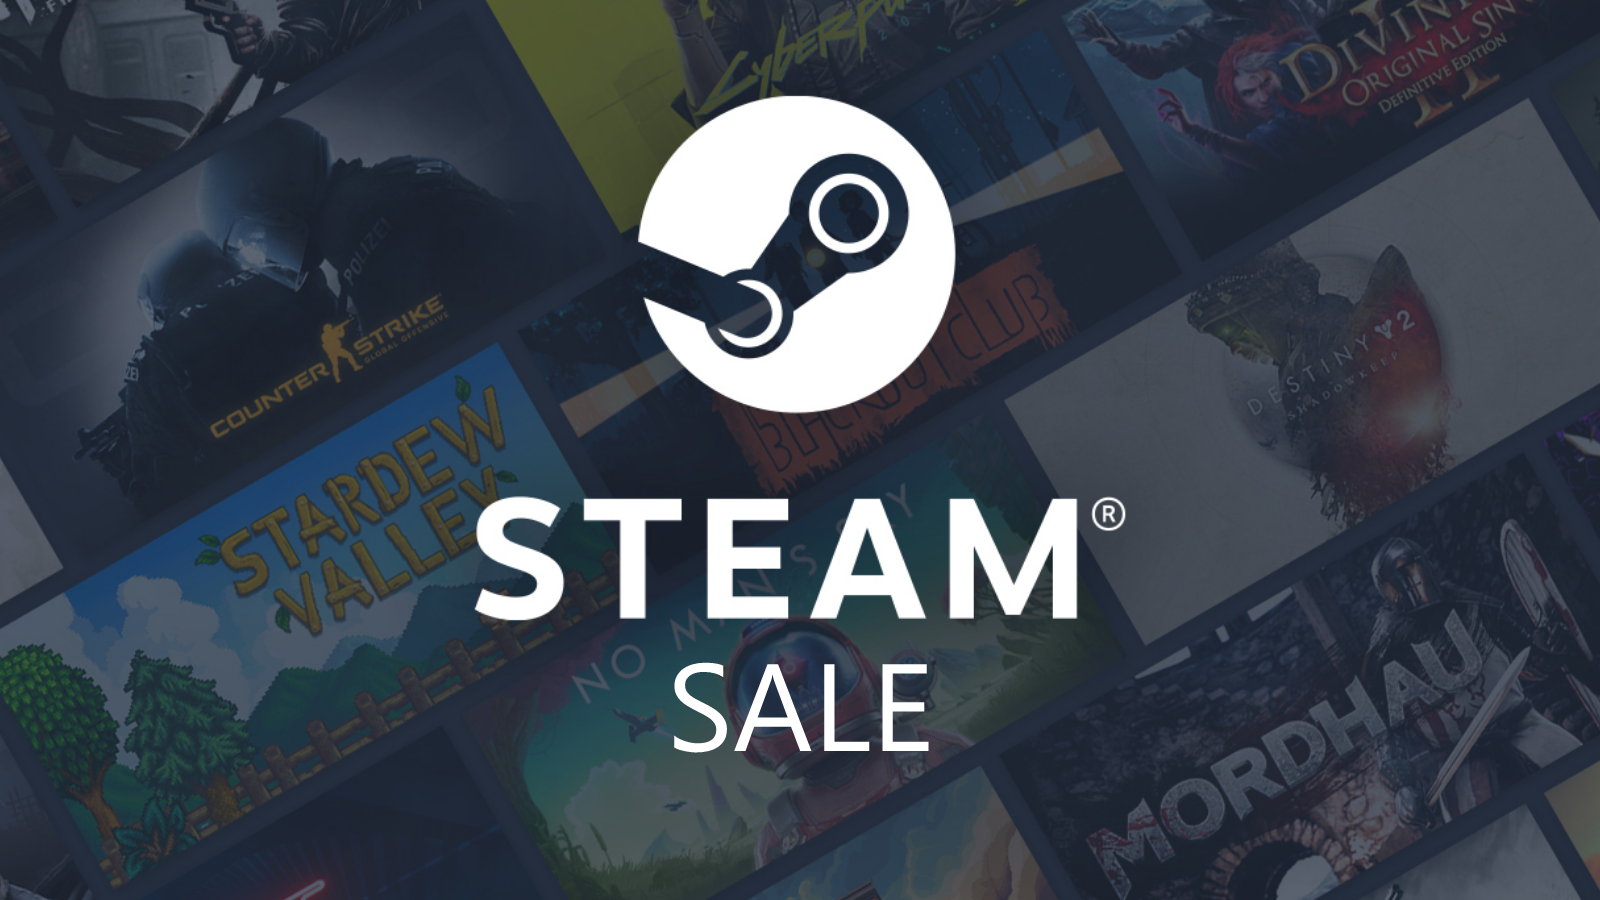 Spring Into Savings: Epic Steam Games Sale!